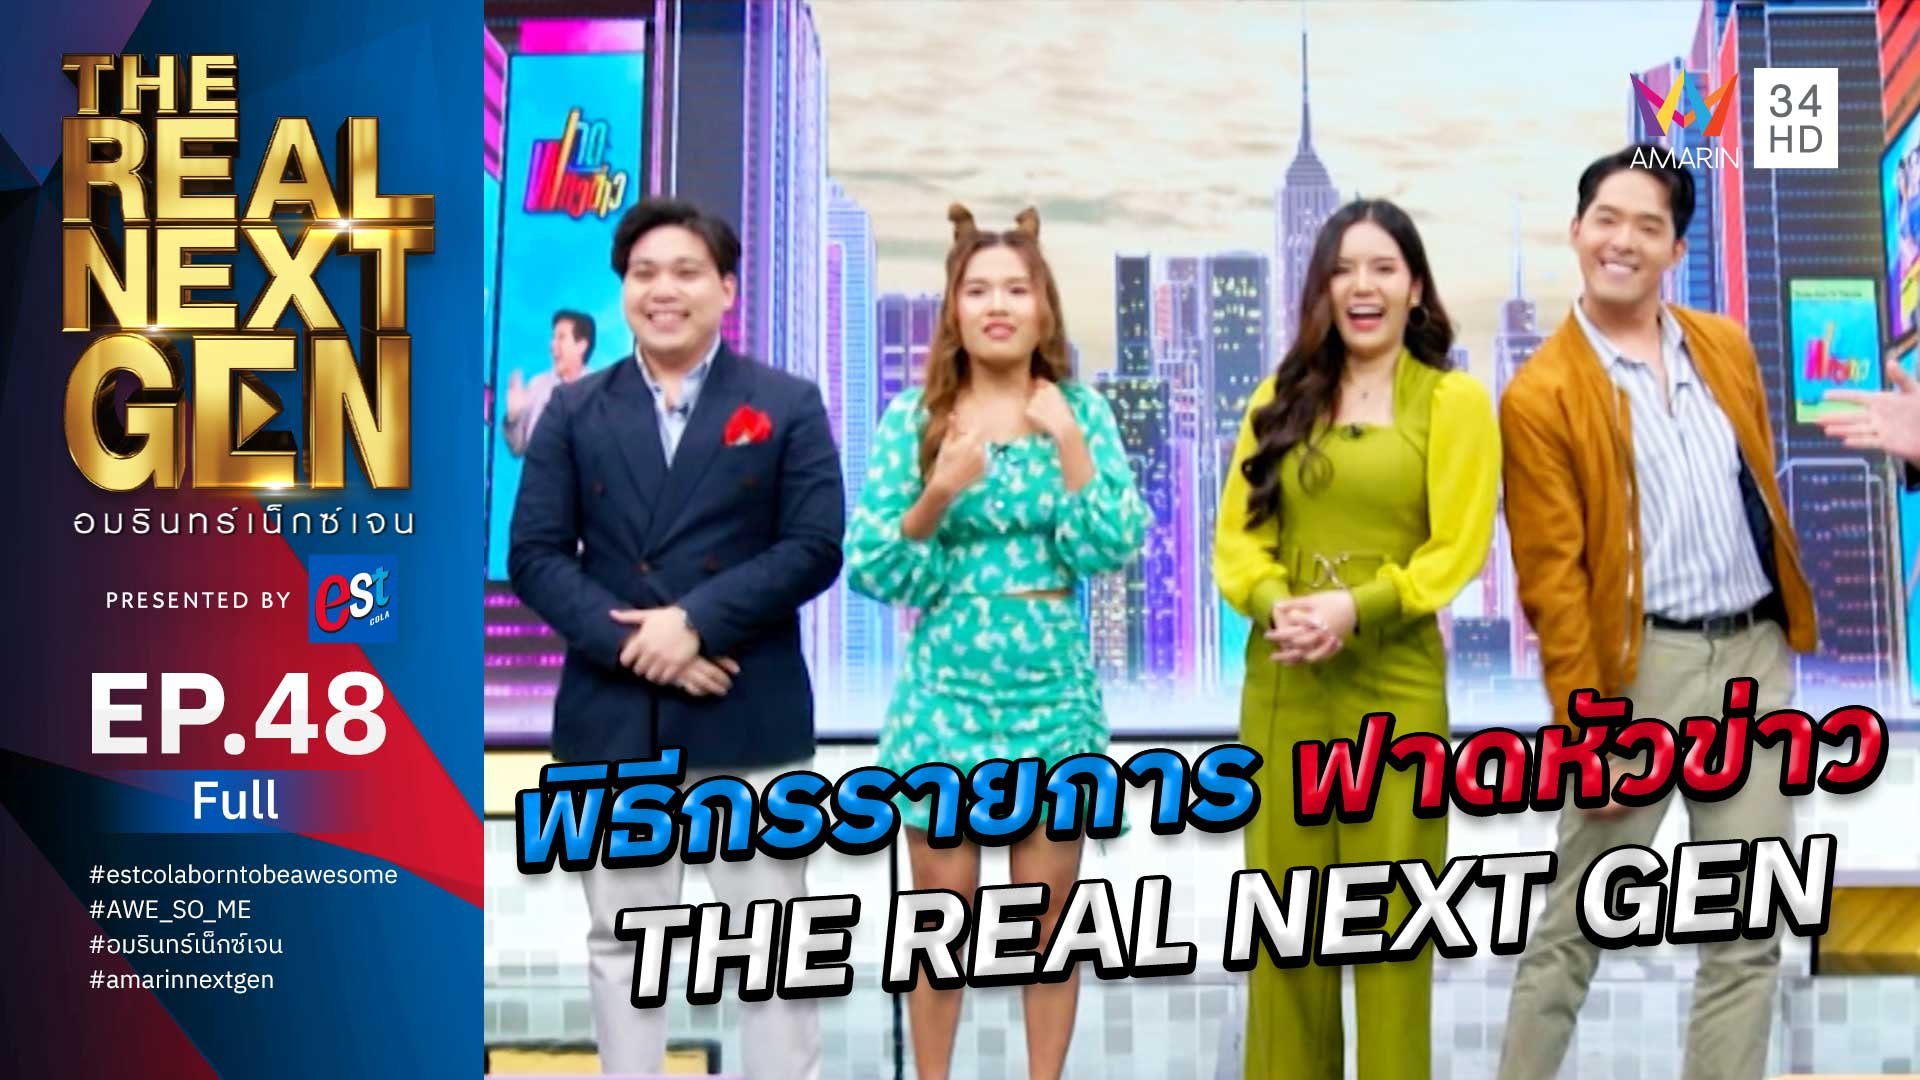 The Real Next Gen อมรินทร์เน็กซ์เจน | EP.48 THE REAL NEXT GEN อมรินทร์เน็กซ์เจน Presented By est cola  | 22 พ.ย. 66 | AMARIN TVHD34